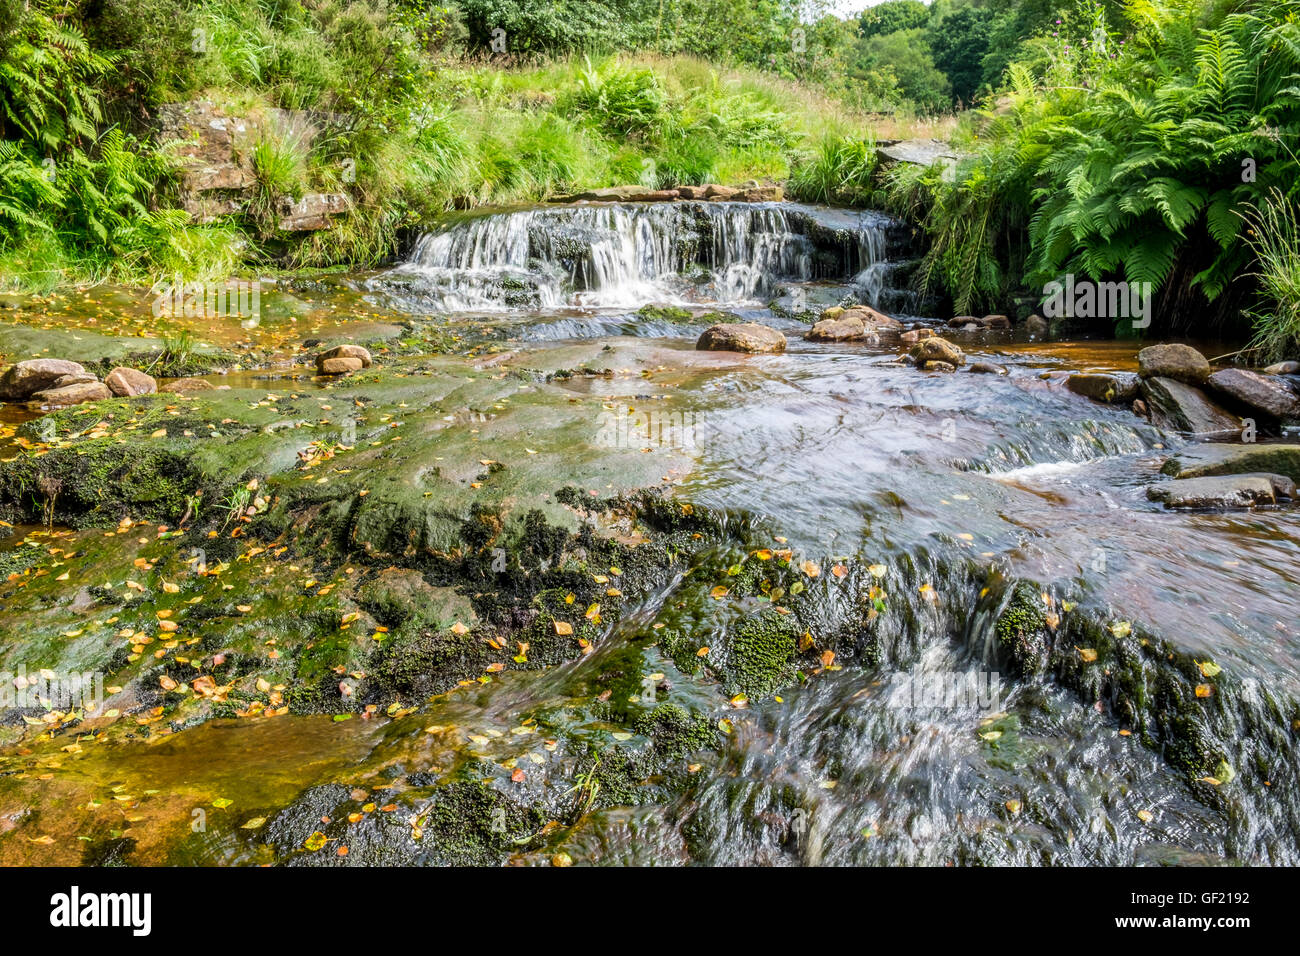 A small stream running over a small waterfall into a larger pool. Stock Photo